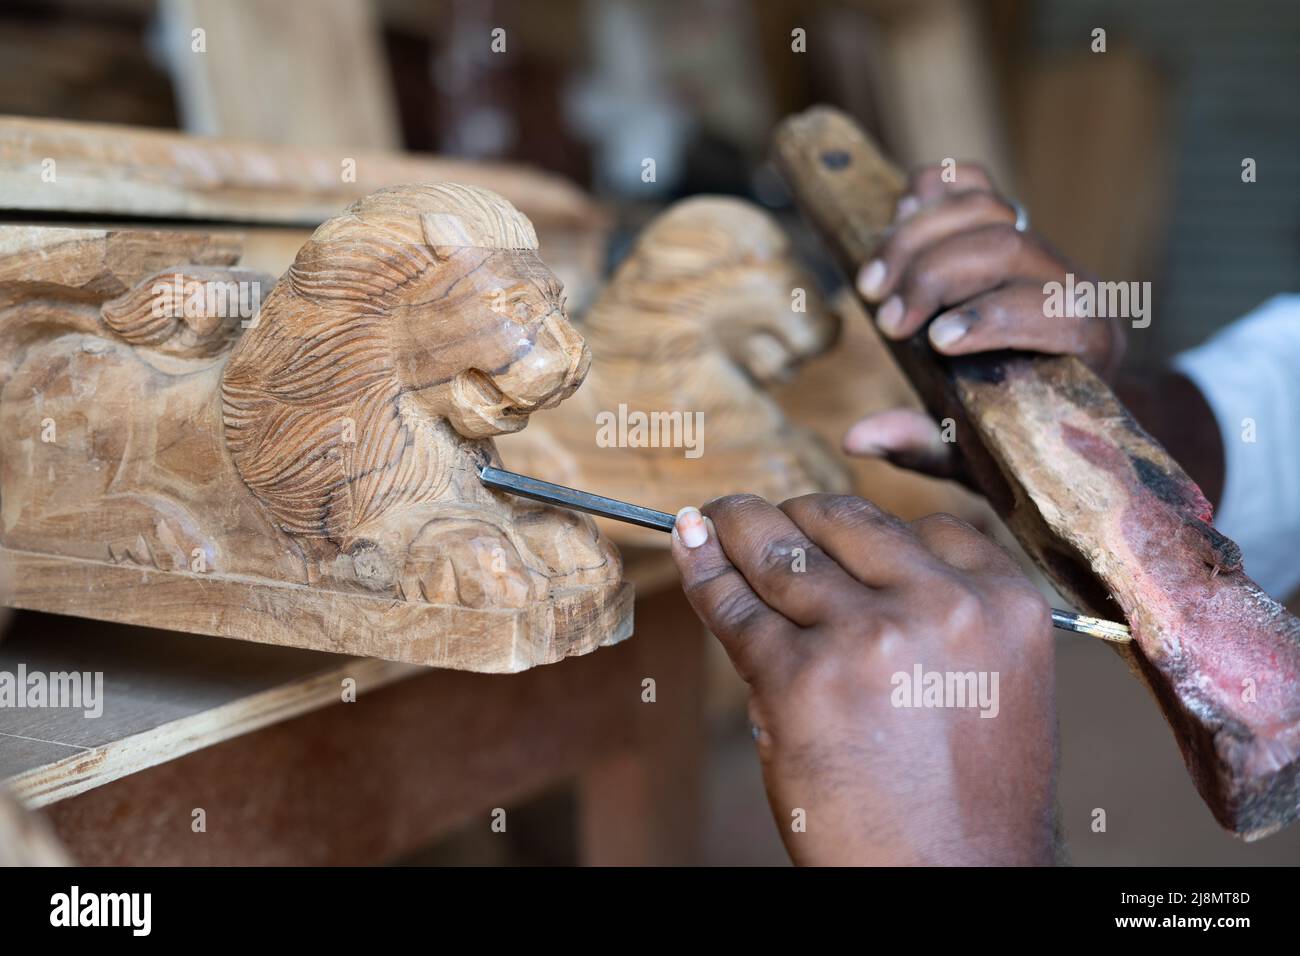 close up shot of carpenter hands busy making wood design or shaping using carpentry tools at shop - concept of creativity, skilled labour and wood Stock Photo